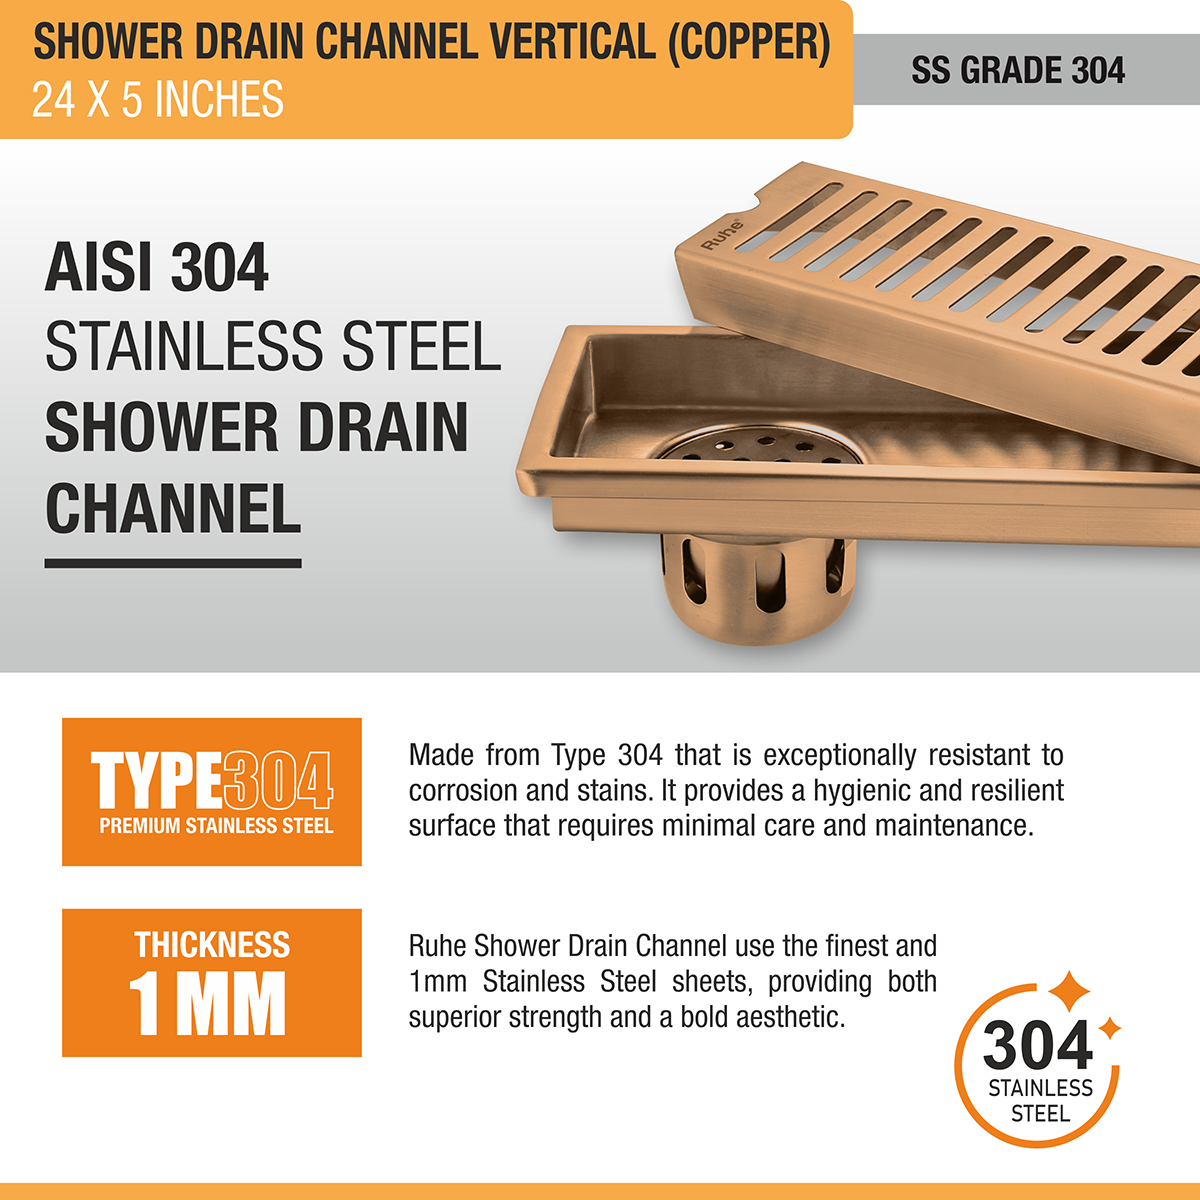 Vertical Shower Drain Channel (24 x 5 Inches) ROSE GOLD/ANTIQUE COPPER stainless steel